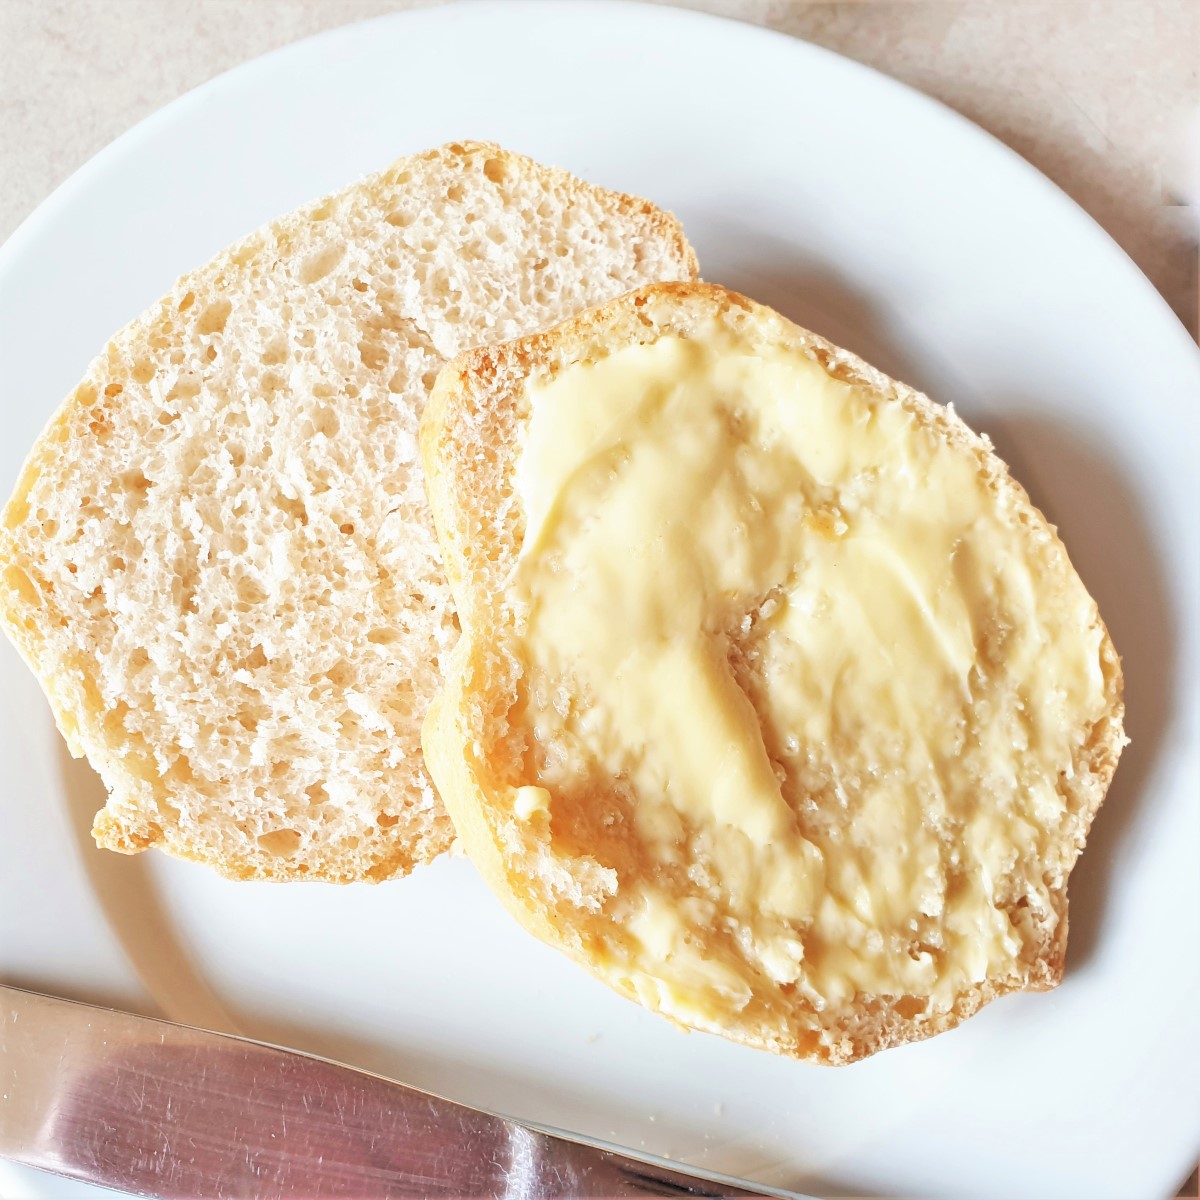 A breadroll split open and spread with butter on a white plate.